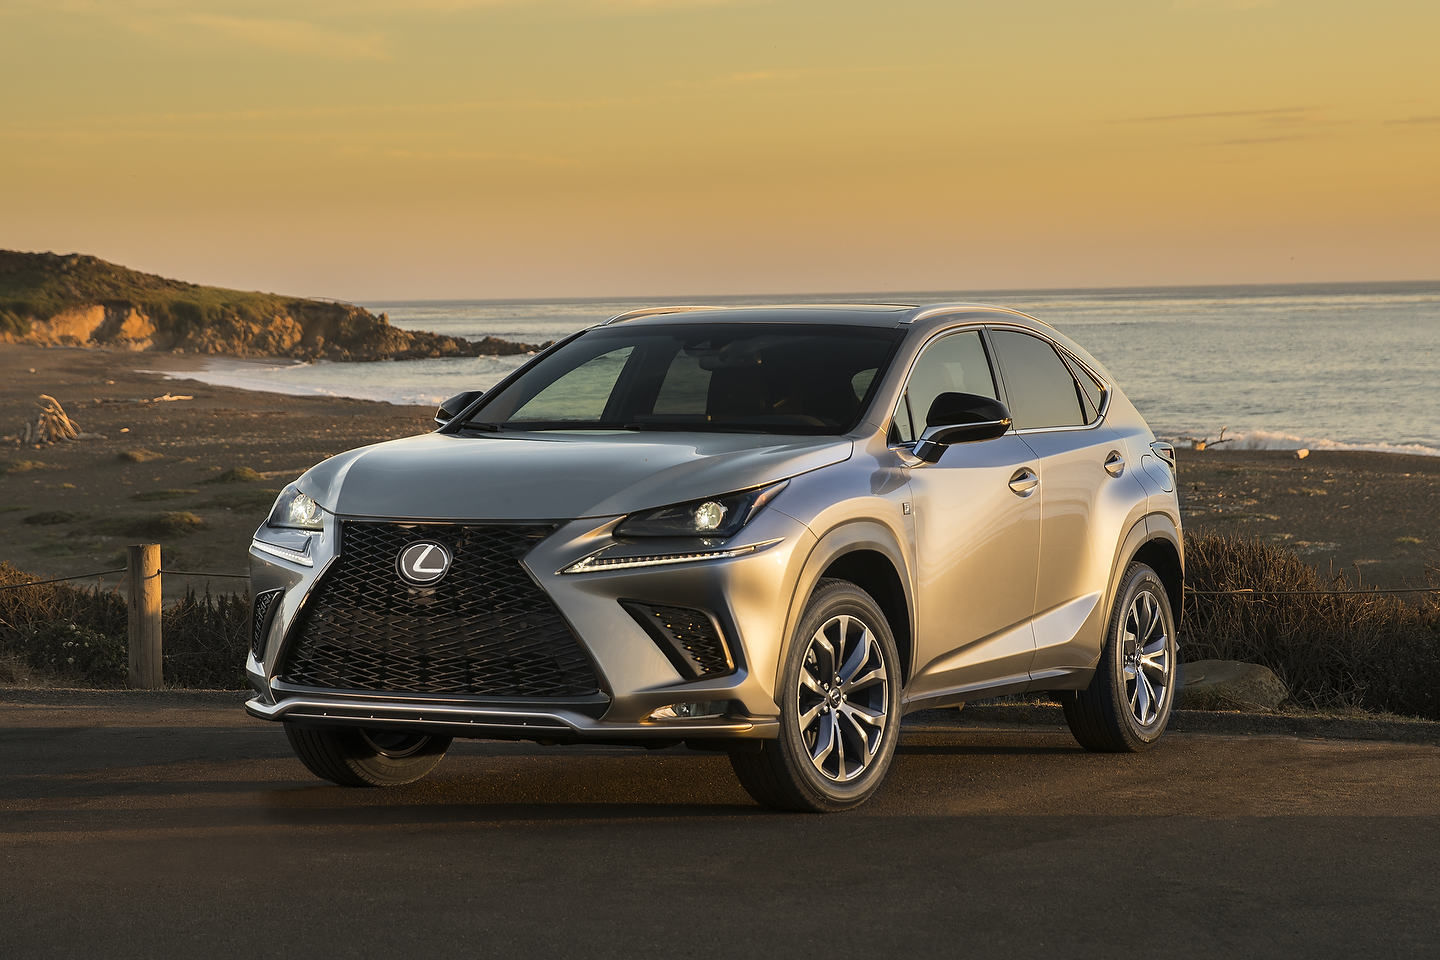 Why the Lexus NX is a Popular Pre-Owned Luxury SUV